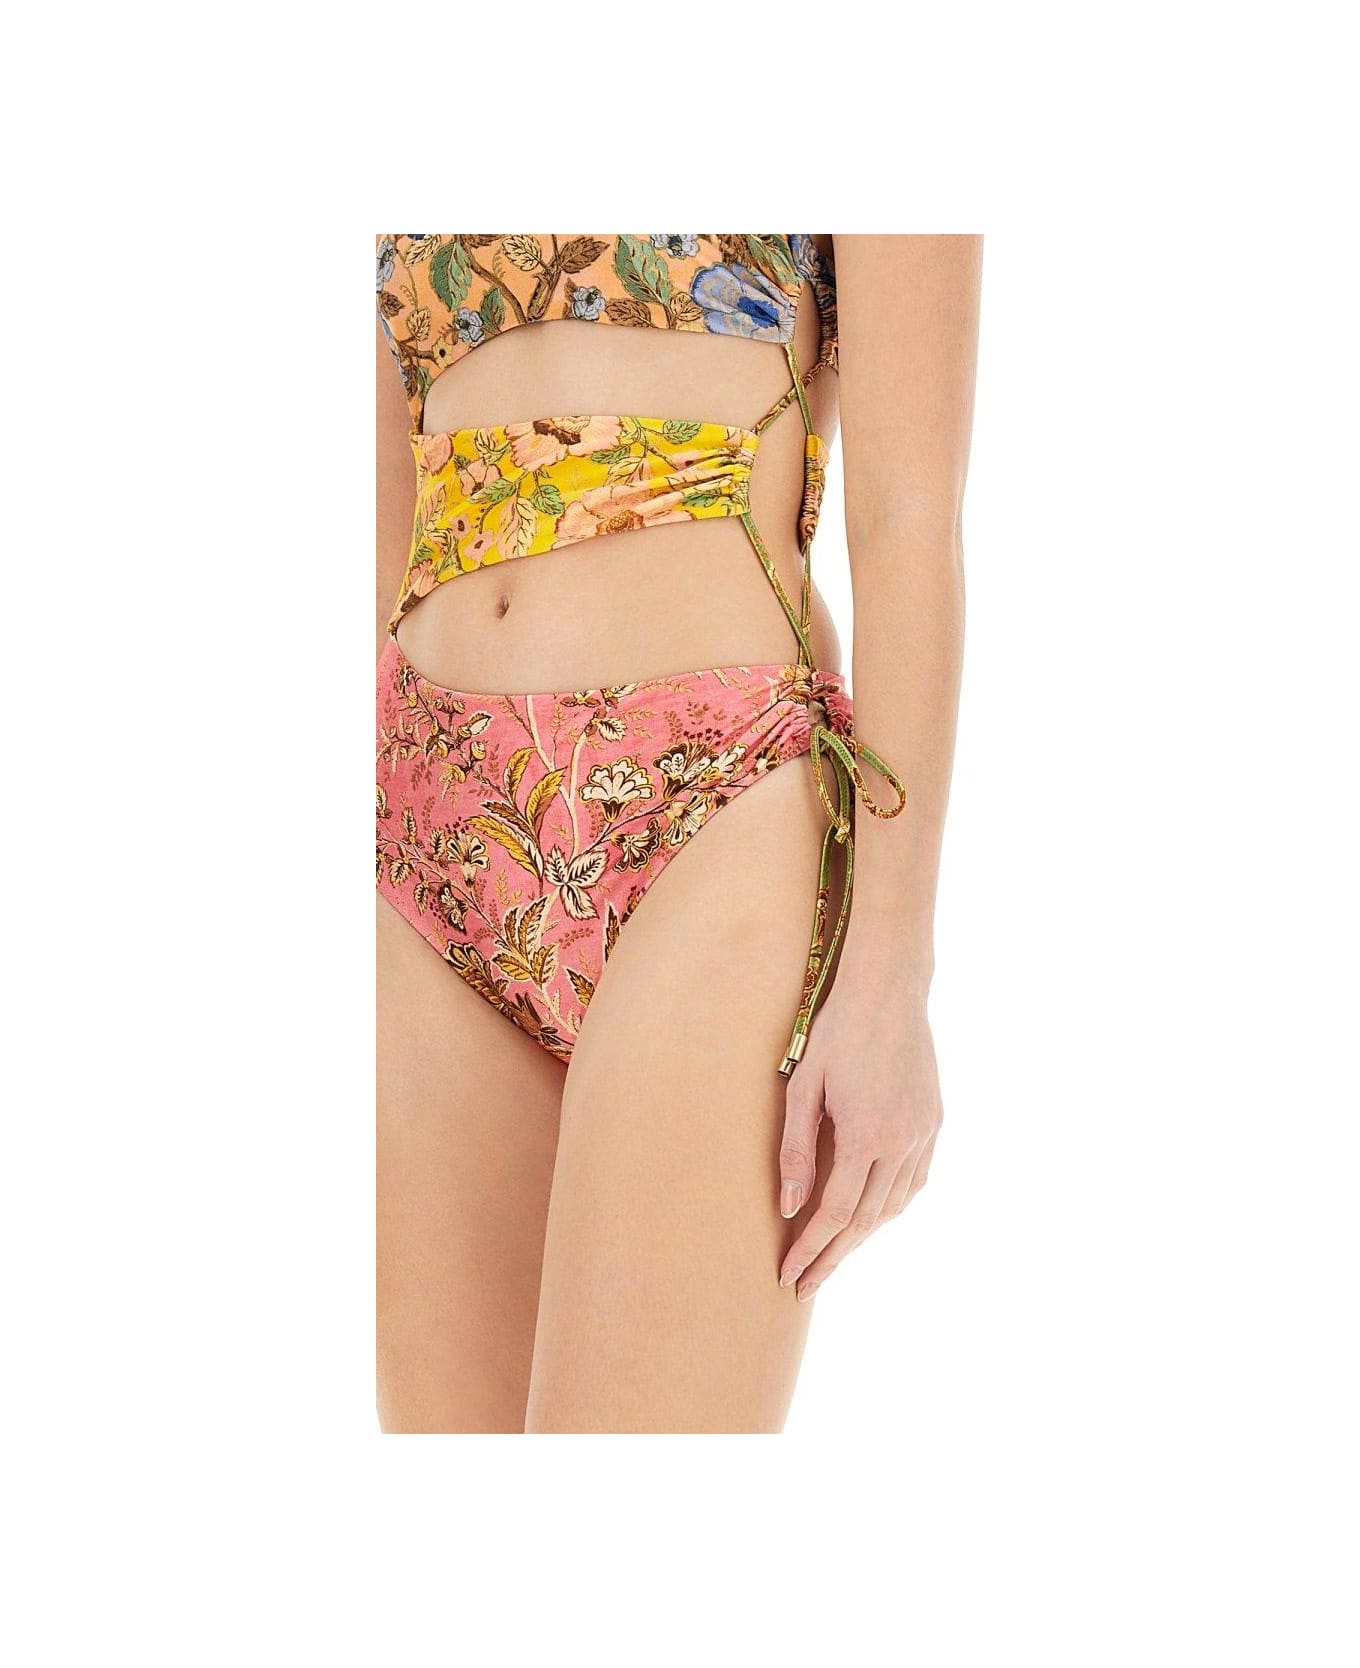 Zimmermann Floral Printed Cut-out One-piece Swimsuit - Multicolor 水着